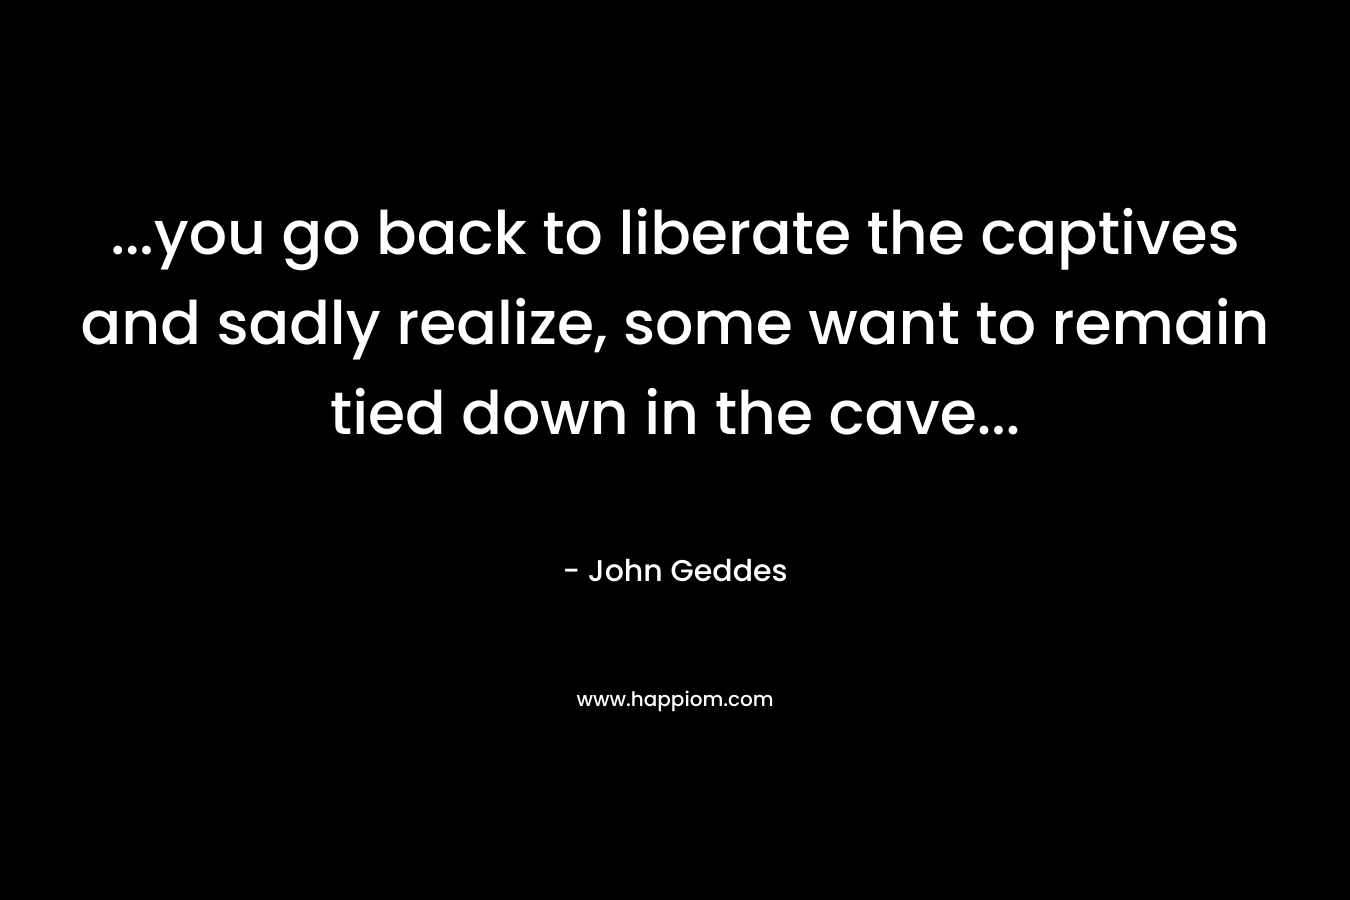 …you go back to liberate the captives and sadly realize, some want to remain tied down in the cave… – John Geddes